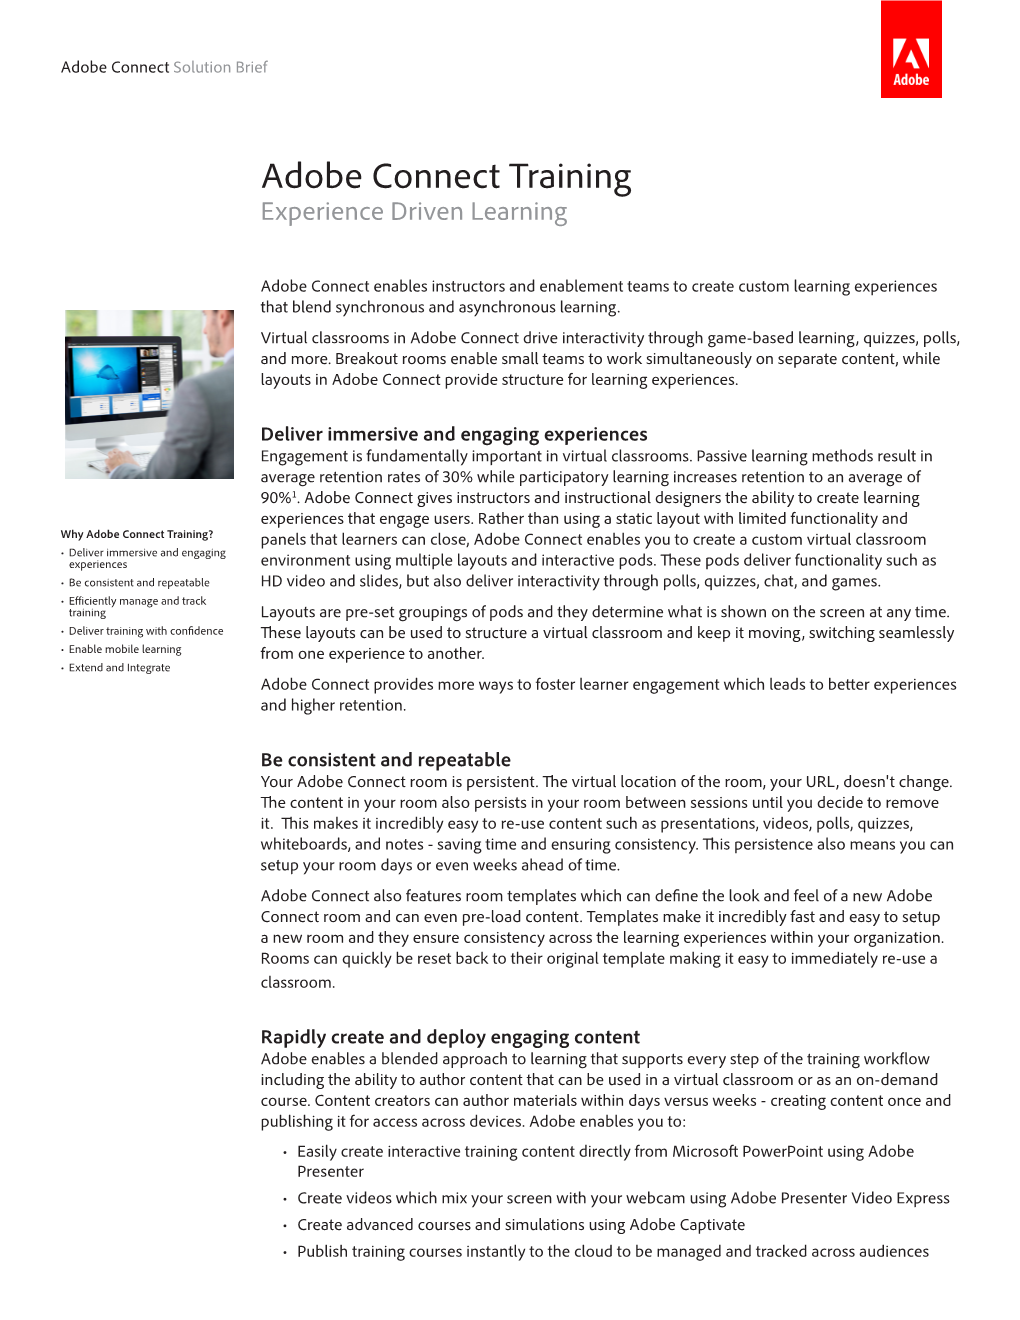 Adobe Connect Training Experience Driven Learning